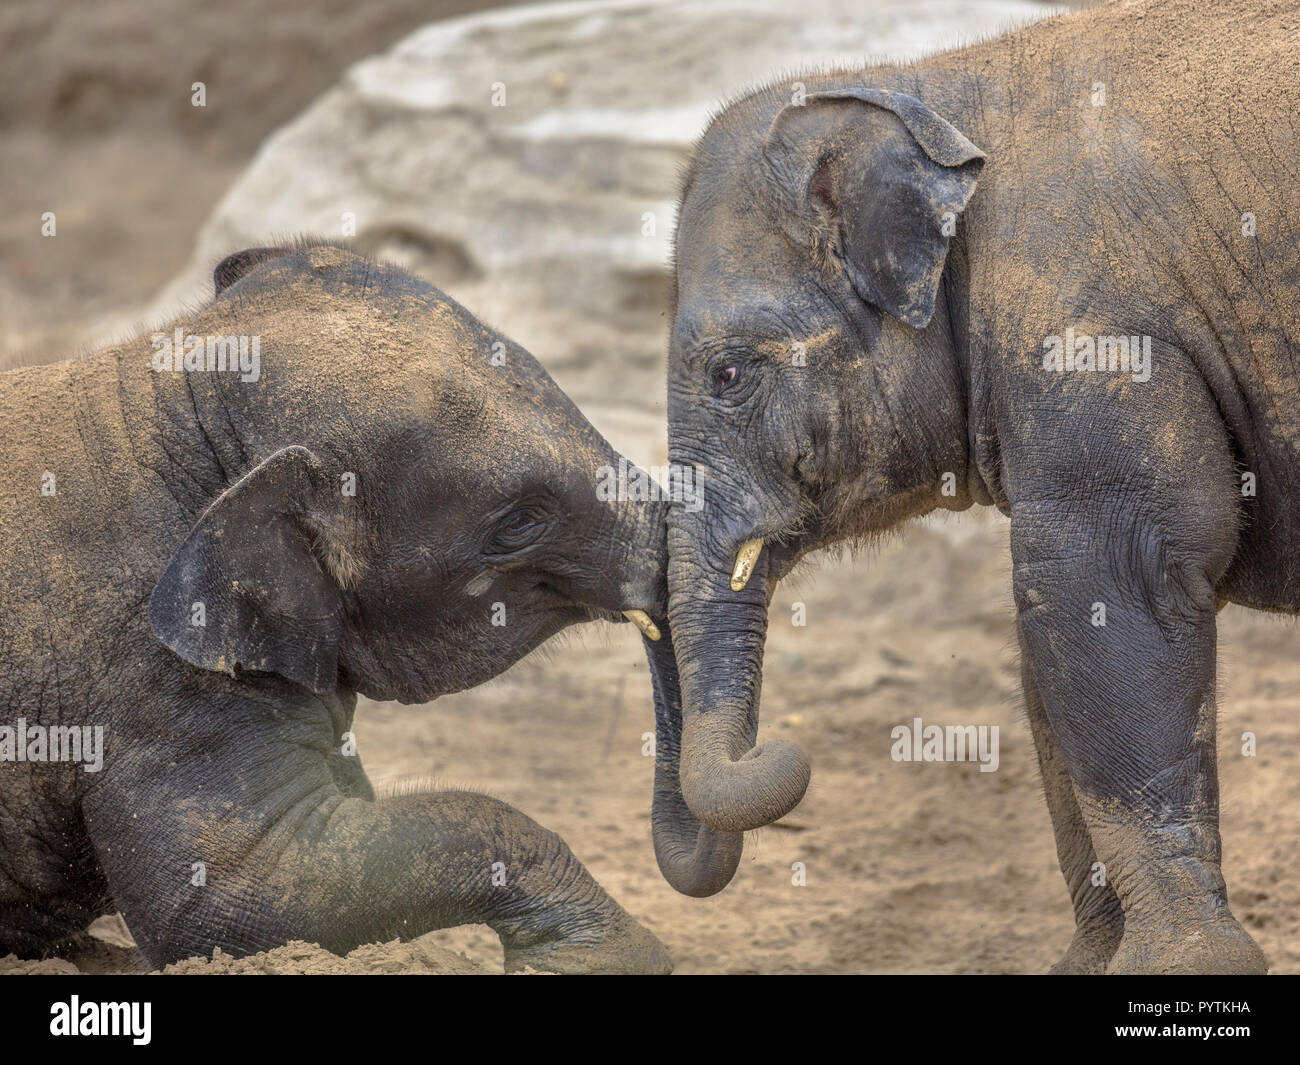 Two young Indian elephants (Elephas maximus indicus) romping in sand Stock Photo